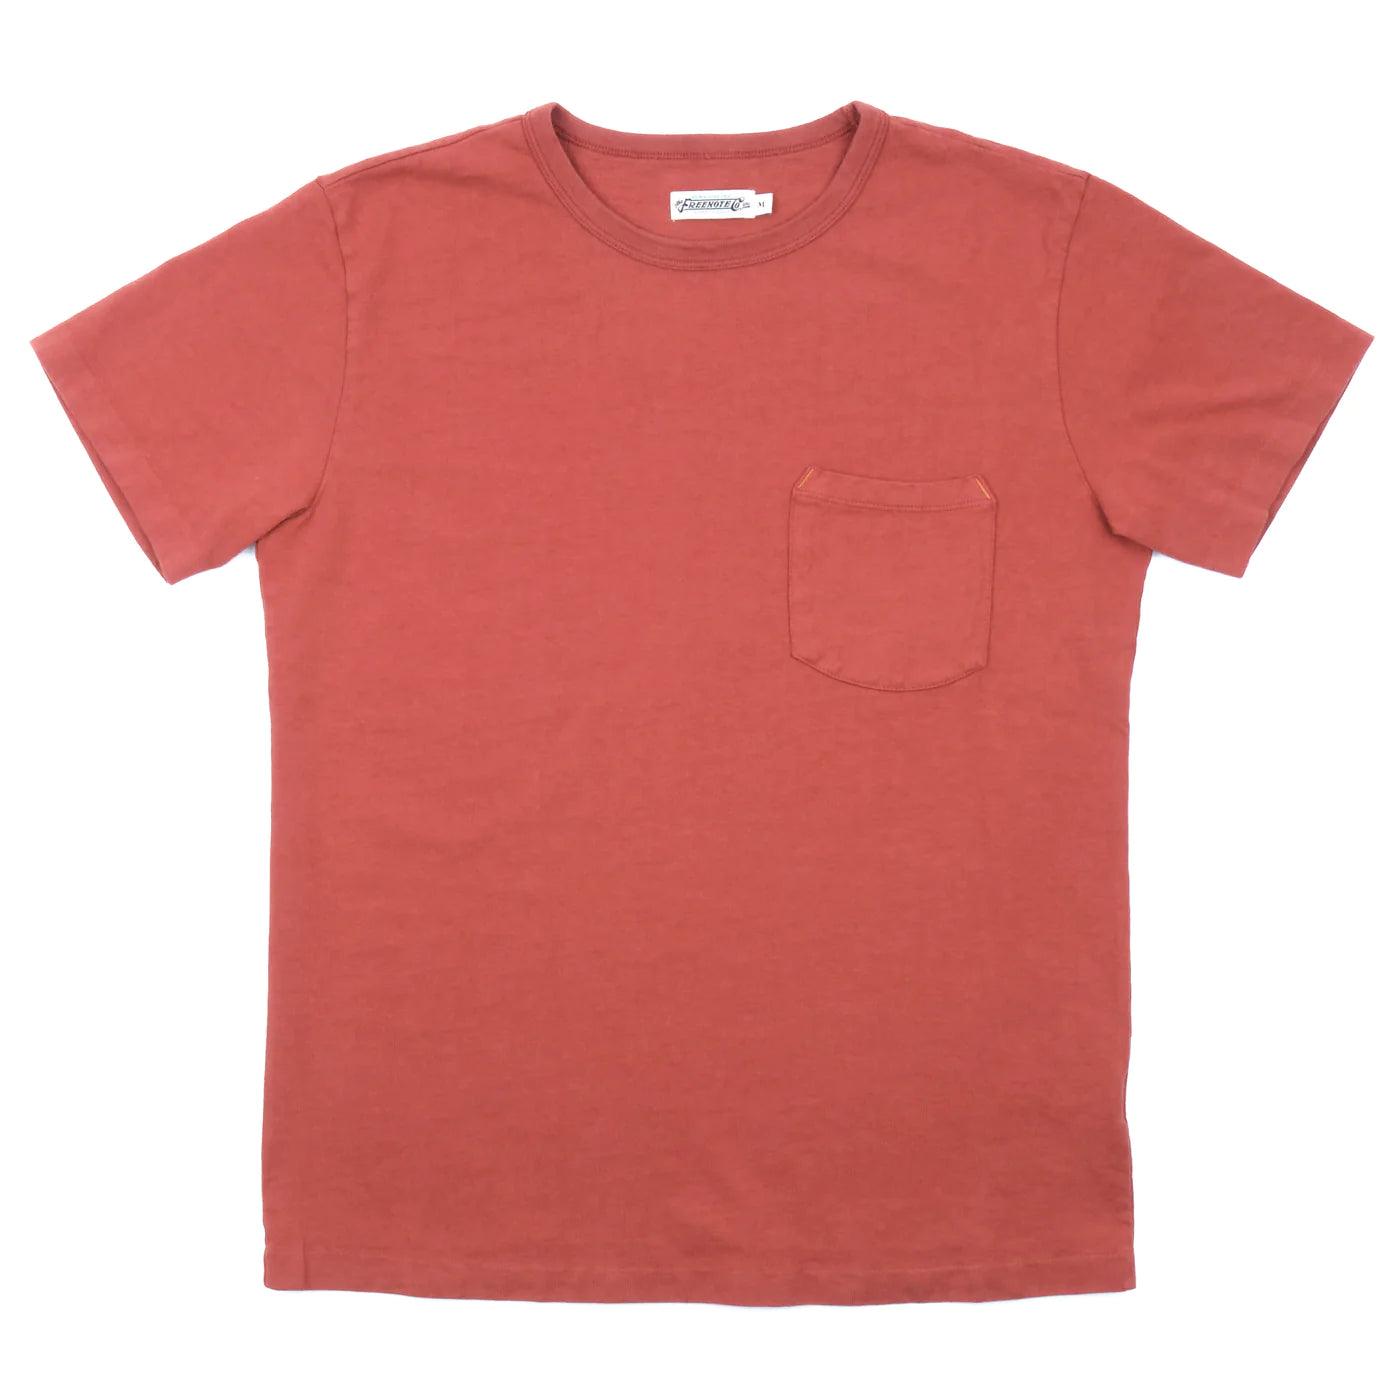 Freenote Cloth Heavyweight 13oz Pocket Tee - Picante - Guilty Party